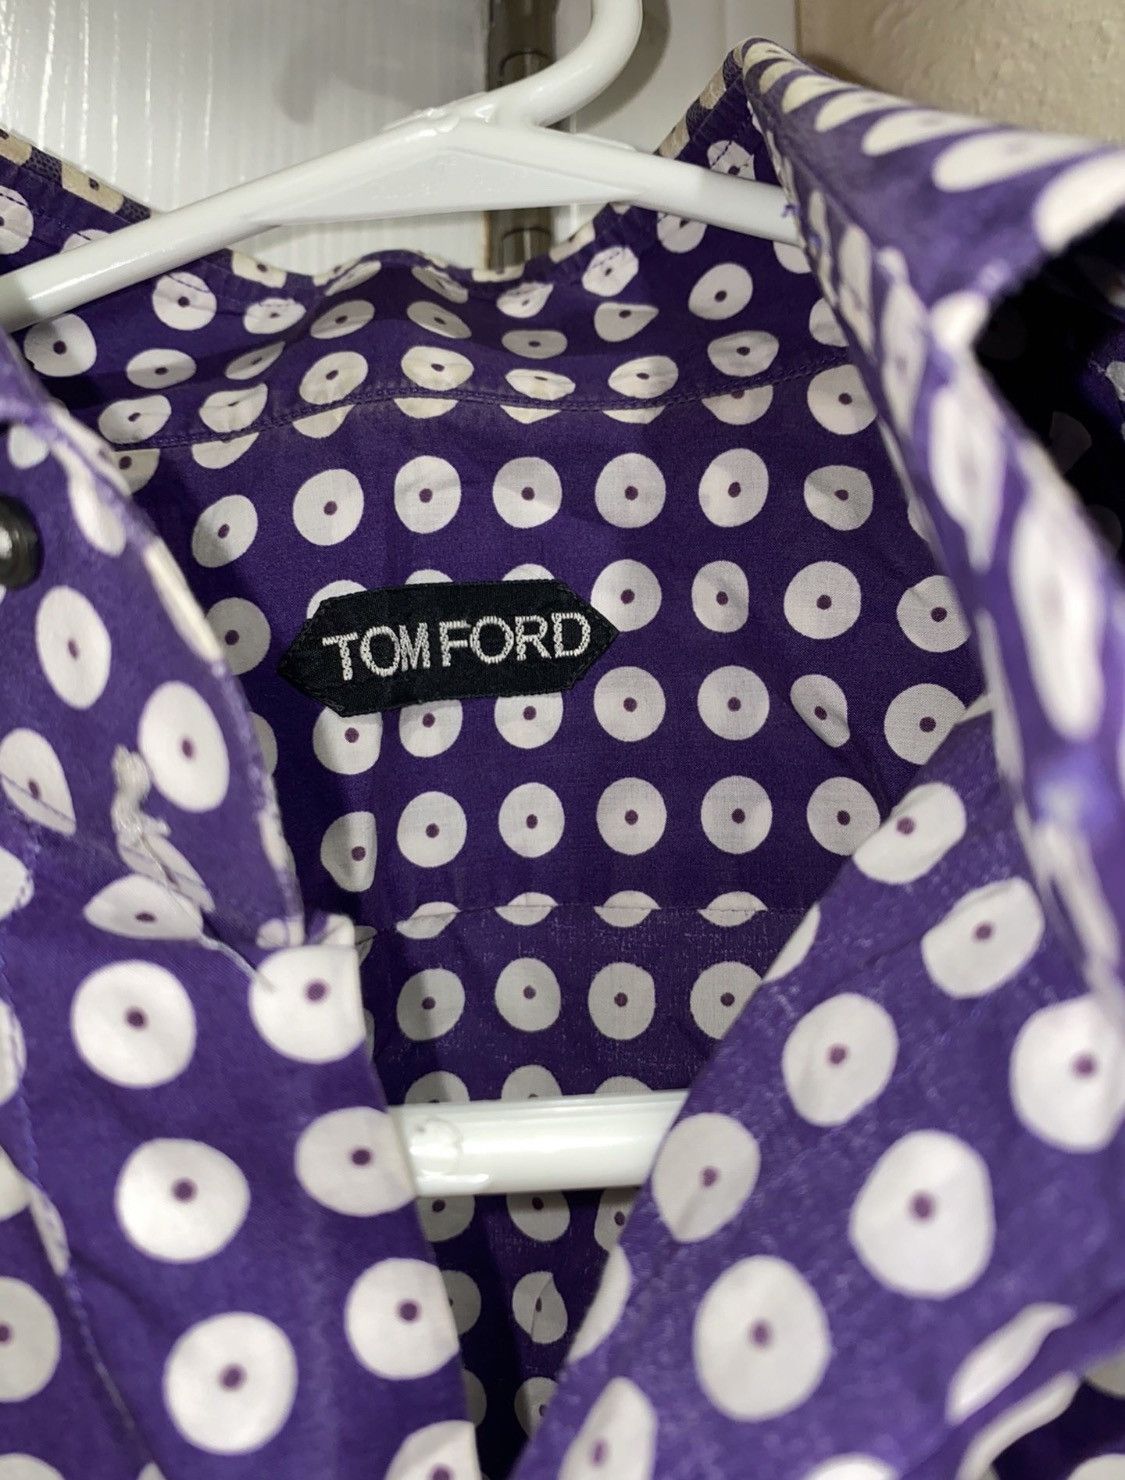 Tom Ford Tom Ford Button Down Size US M / EU 48-50 / 2 - 2 Preview